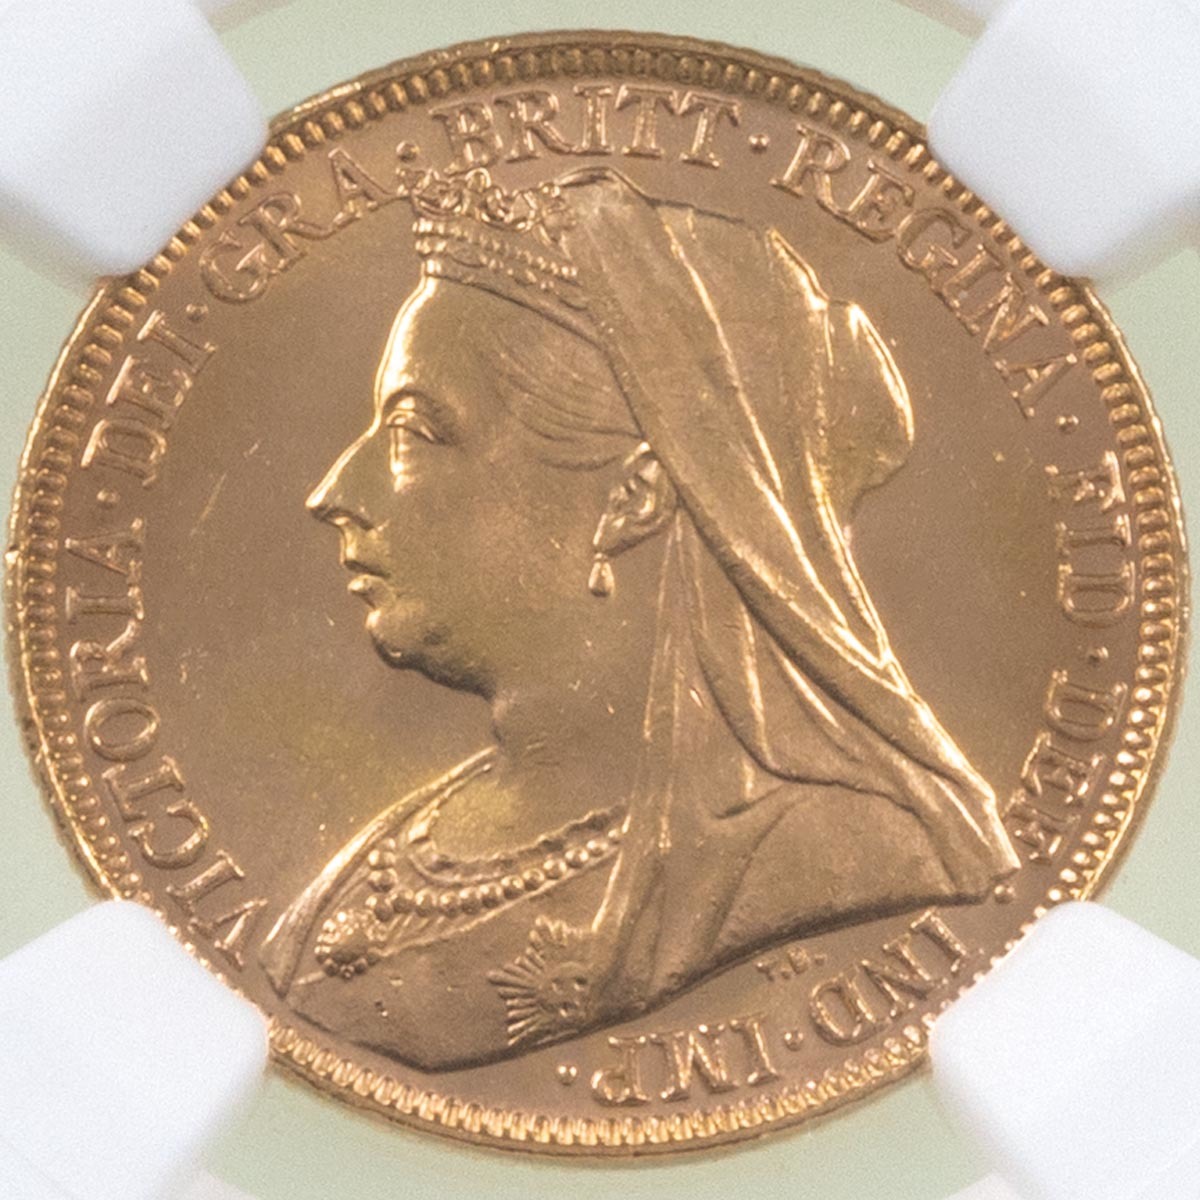 1897 Queen Victoria Gold Full Sovereign Melbourne Australia Mint Widowed Head NGC Graded MS 64 Obverse